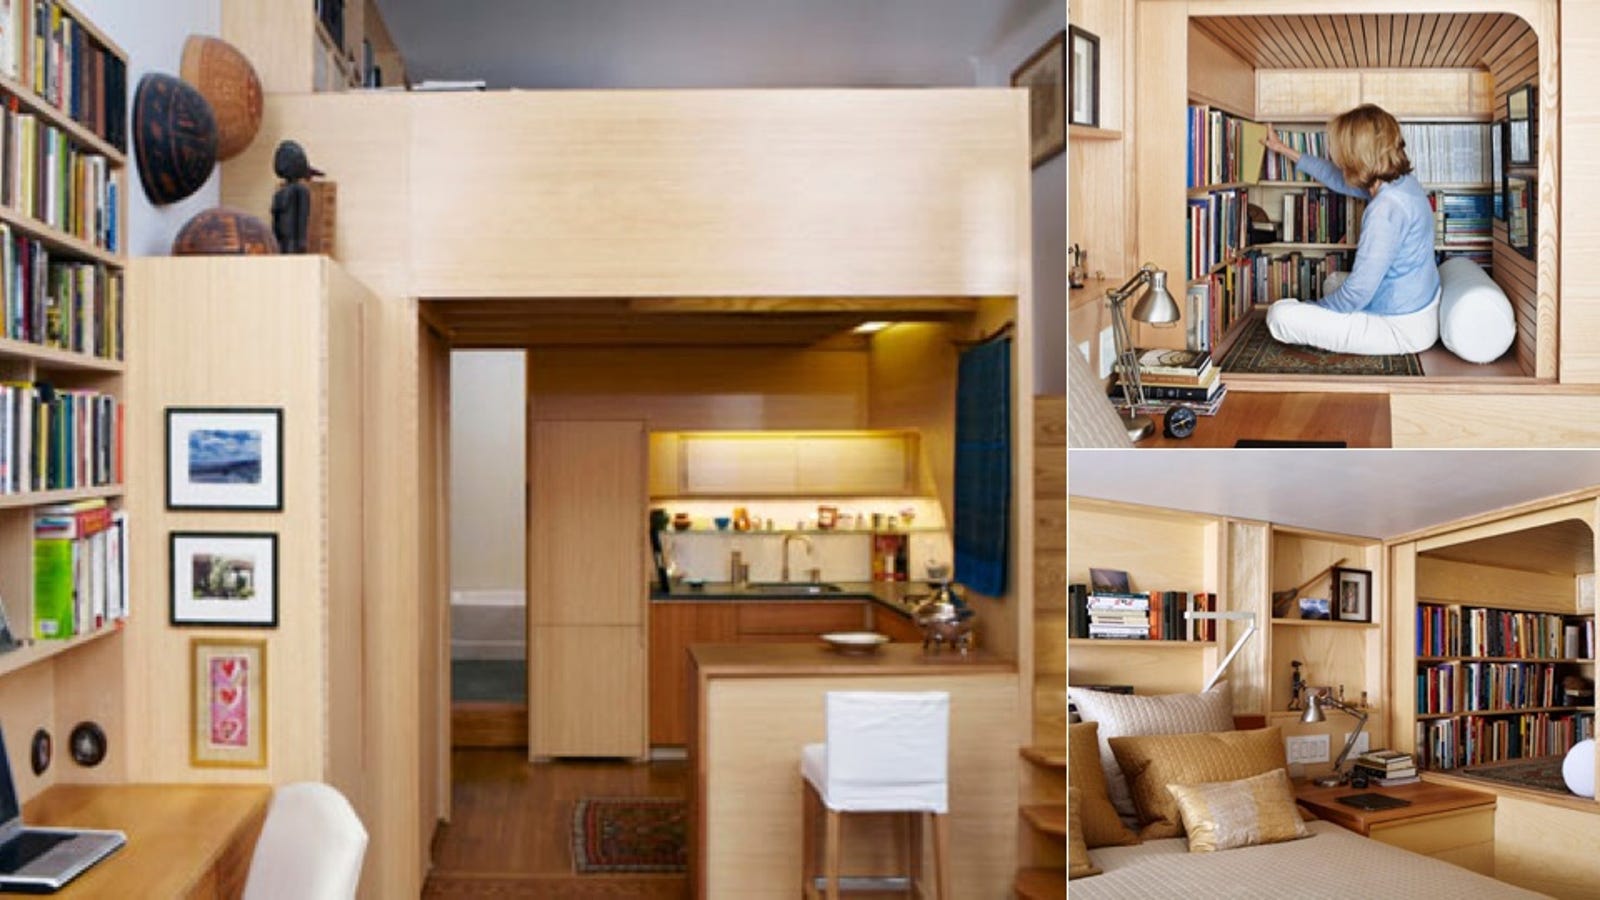 An Amazing 240-Square Foot Apartment Works Like a Magical Jewelry Box